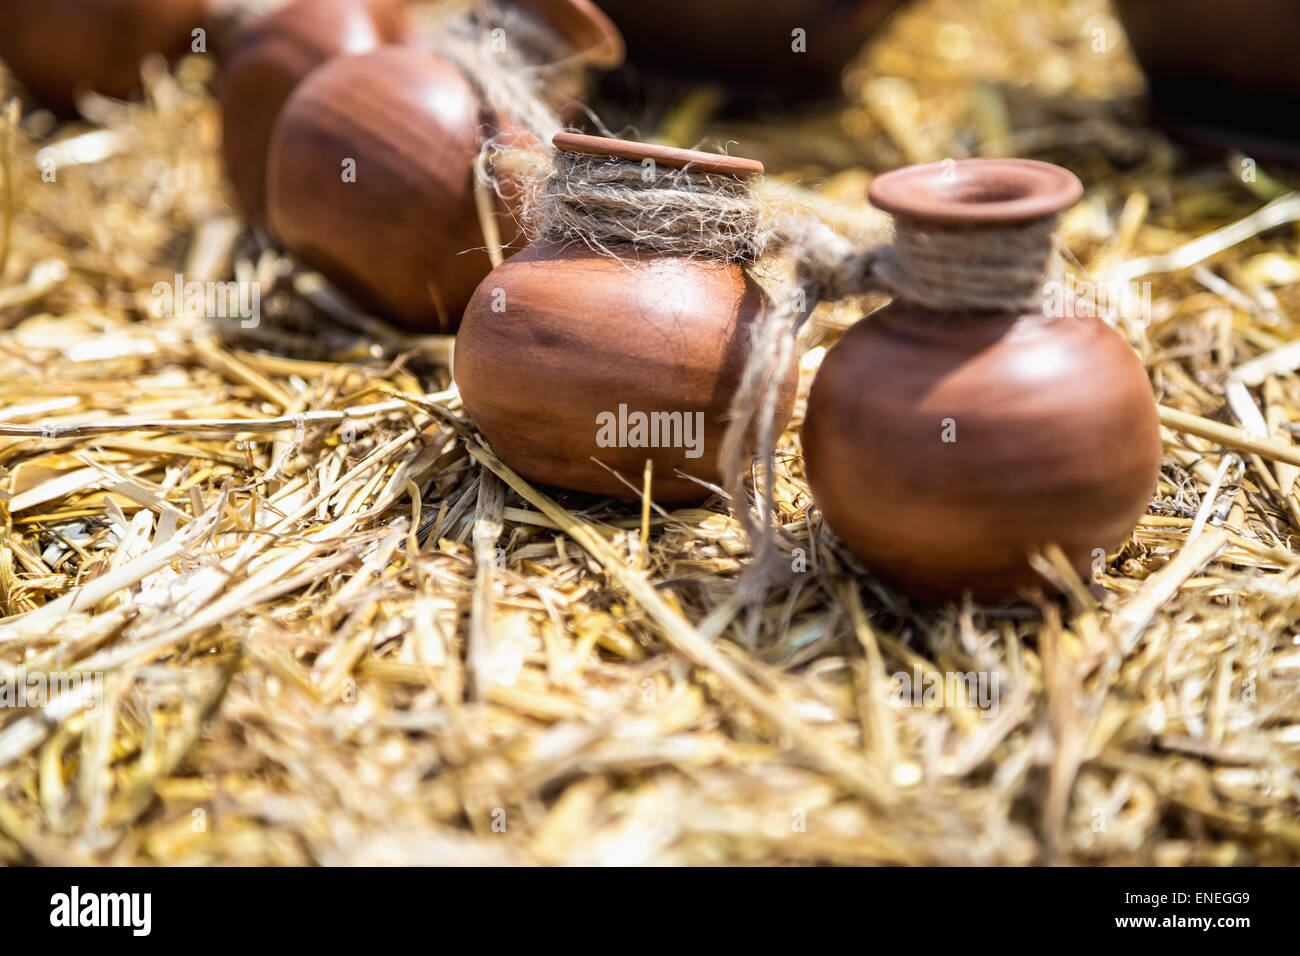 Small ceramic crocks or pot countryside decoration or souvenir on straw. Selective focus of image on one of crock Stock Photo